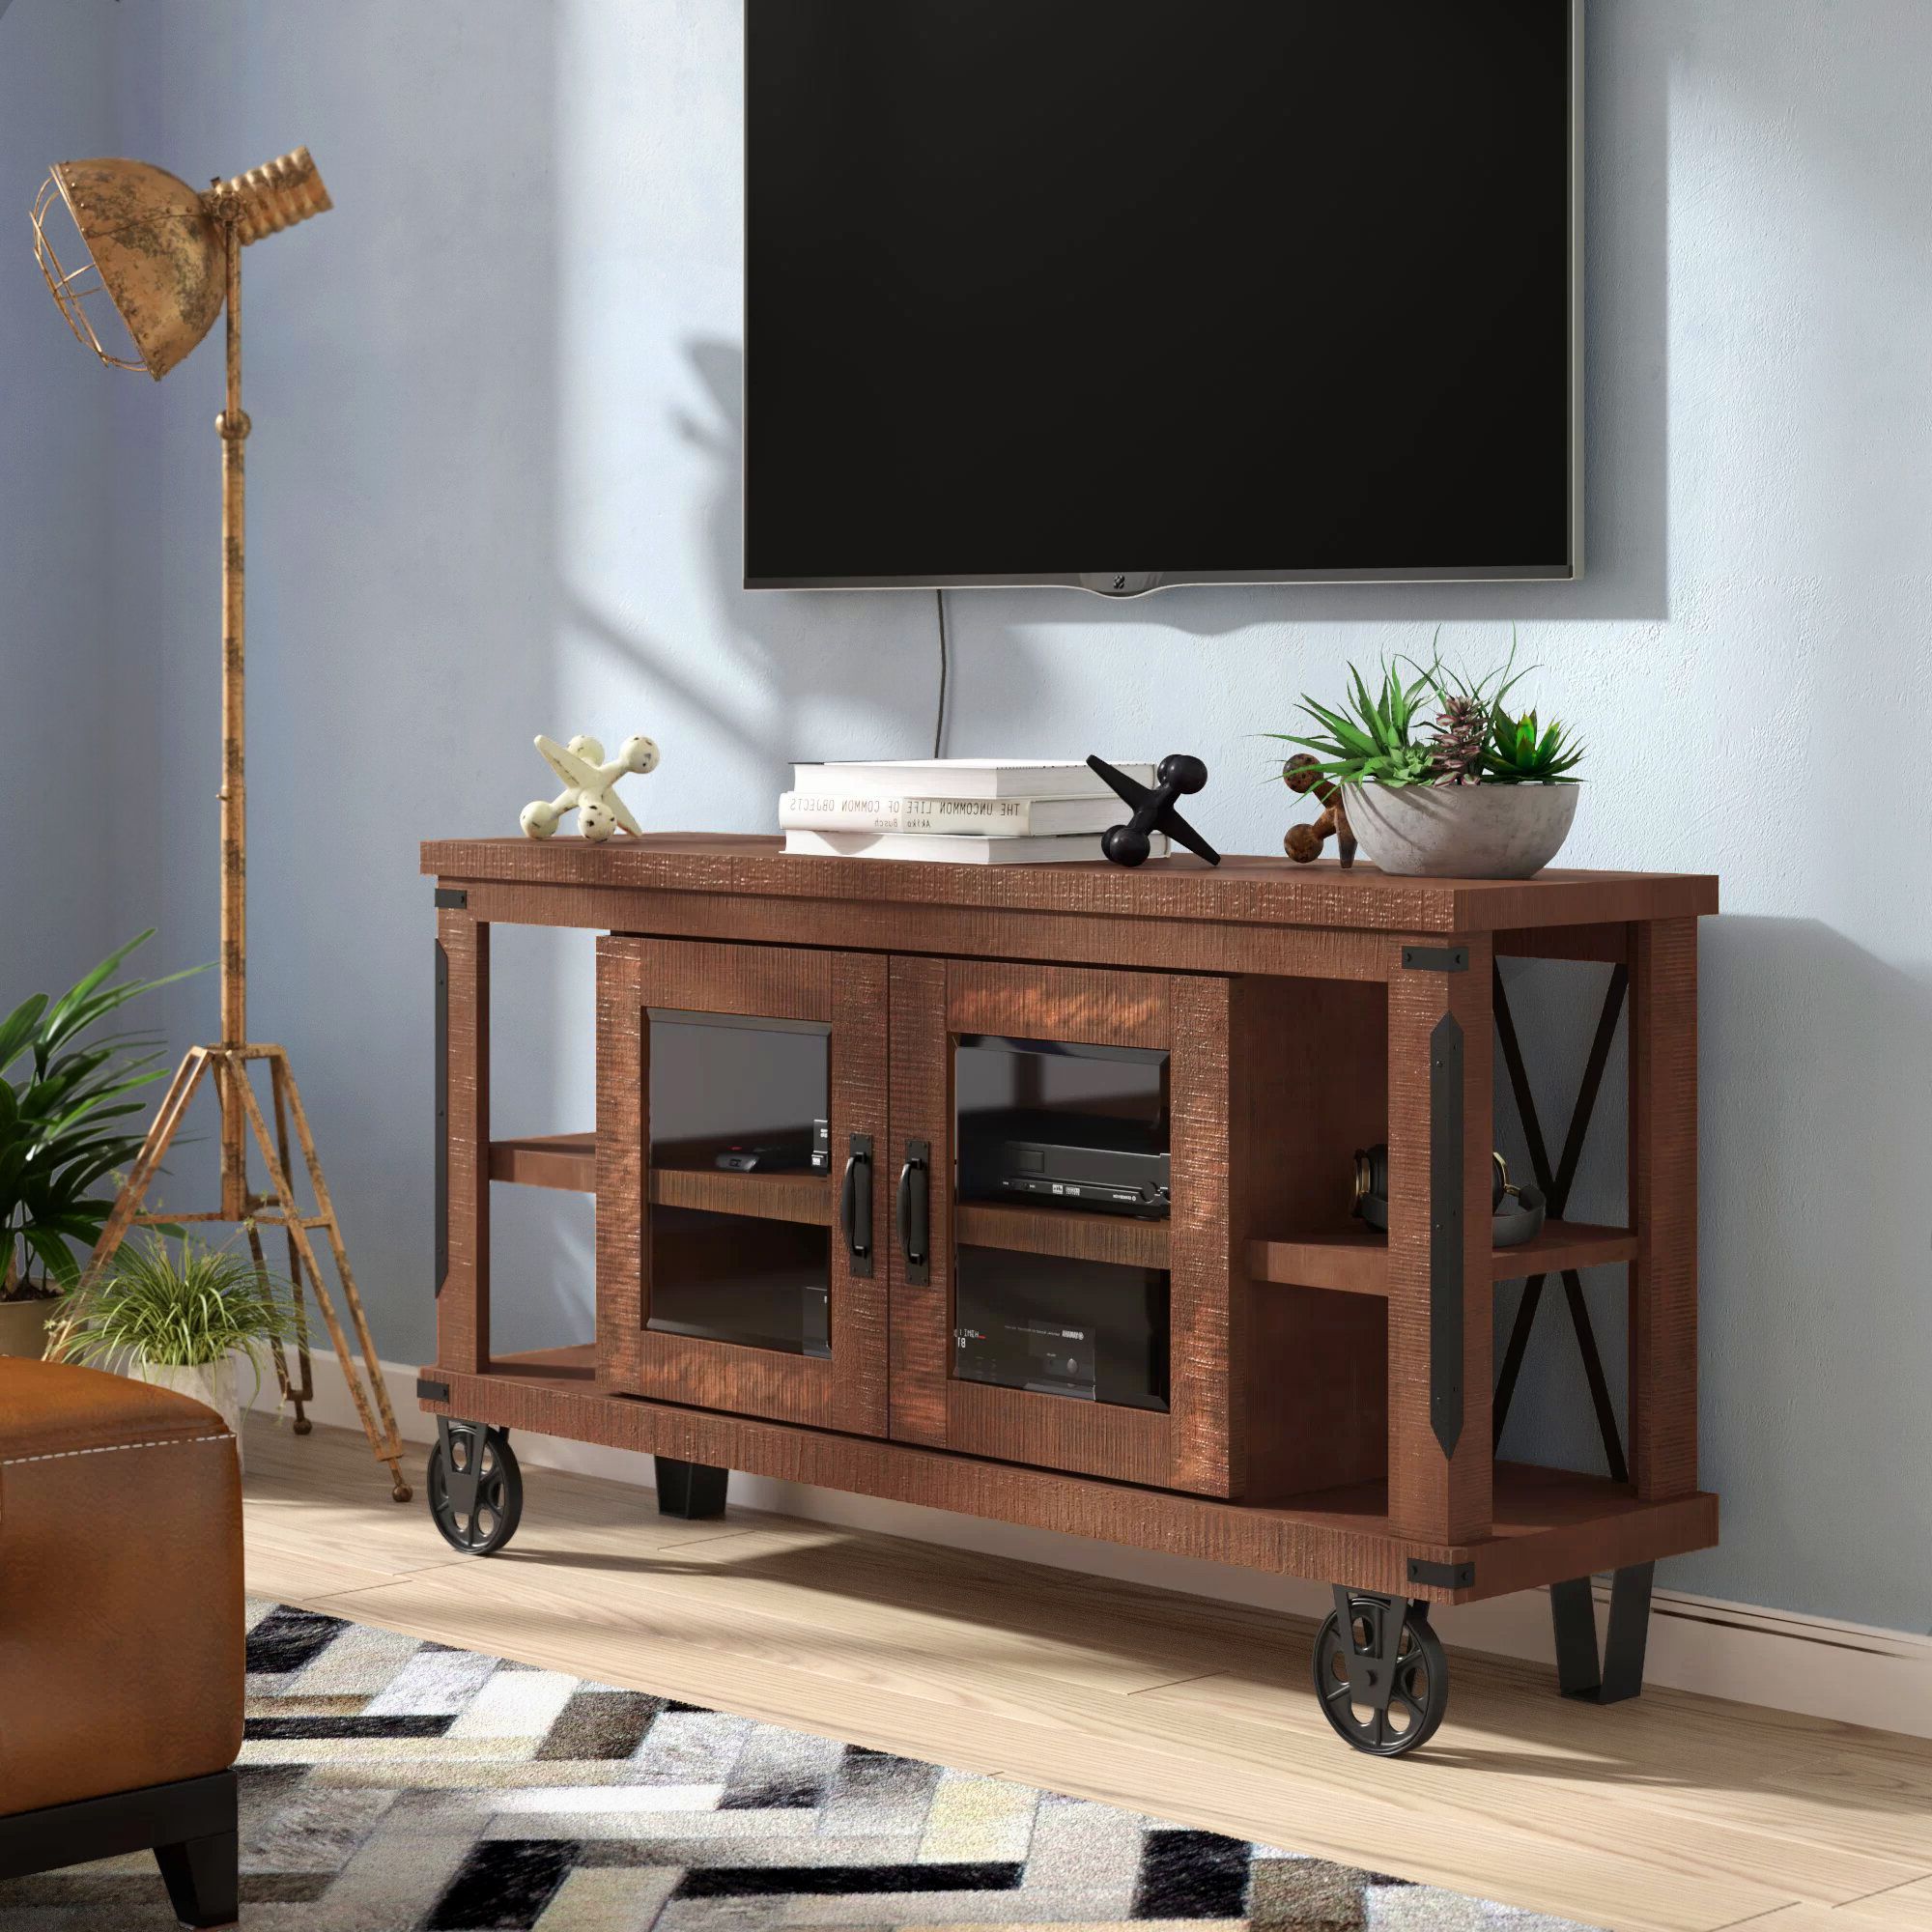 Well Known Tv Stand Casters Wheels – Tavr Moblile Floor Tv Stand Cart With Audio With Modern Rolling Tv Stands (View 10 of 15)